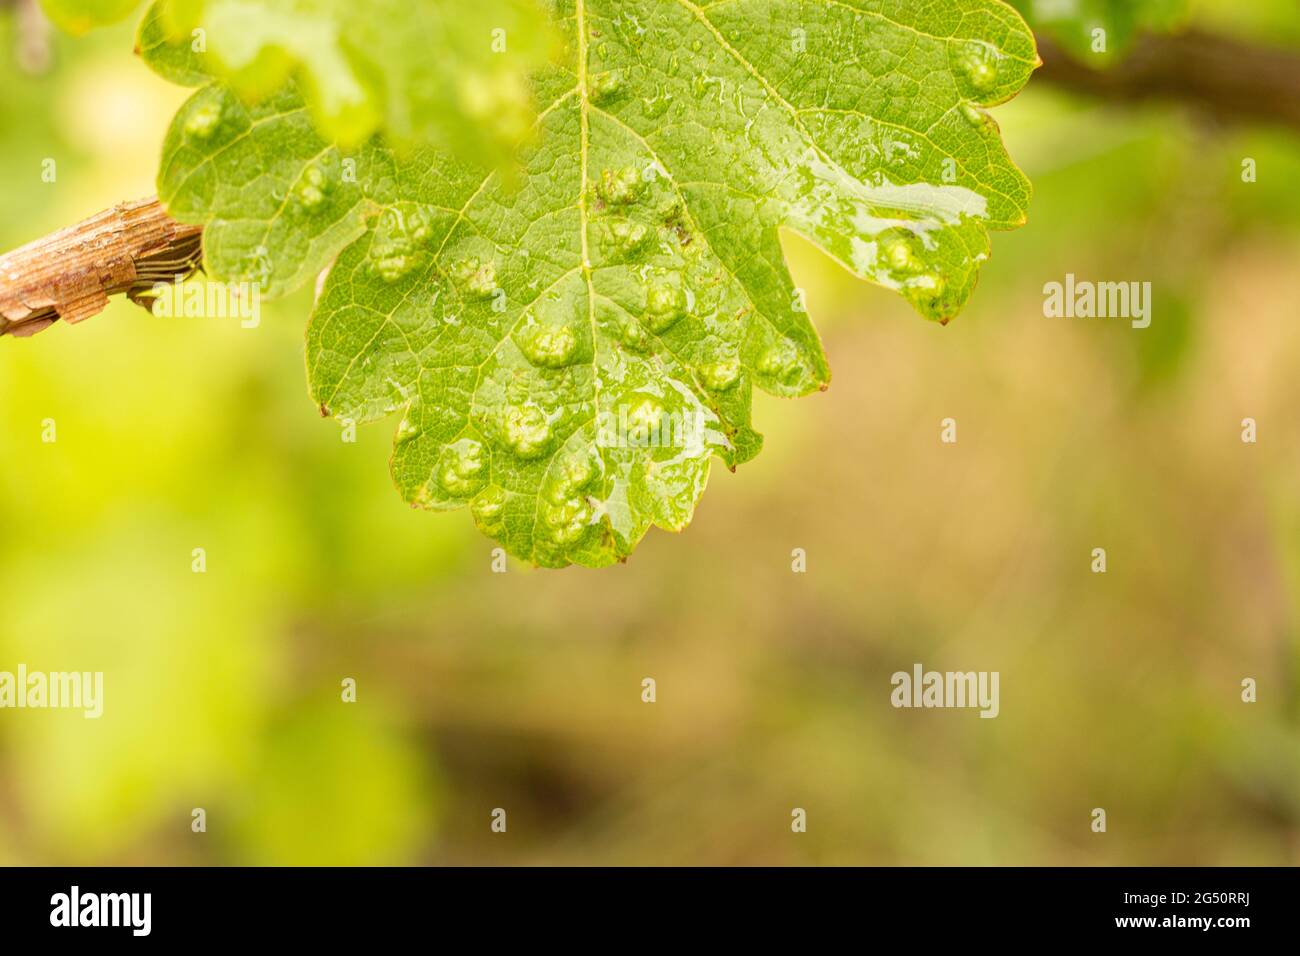 Blisters on a grape leaf damaged by spider mites in a vineyard. Vineyard diseases Stock Photo